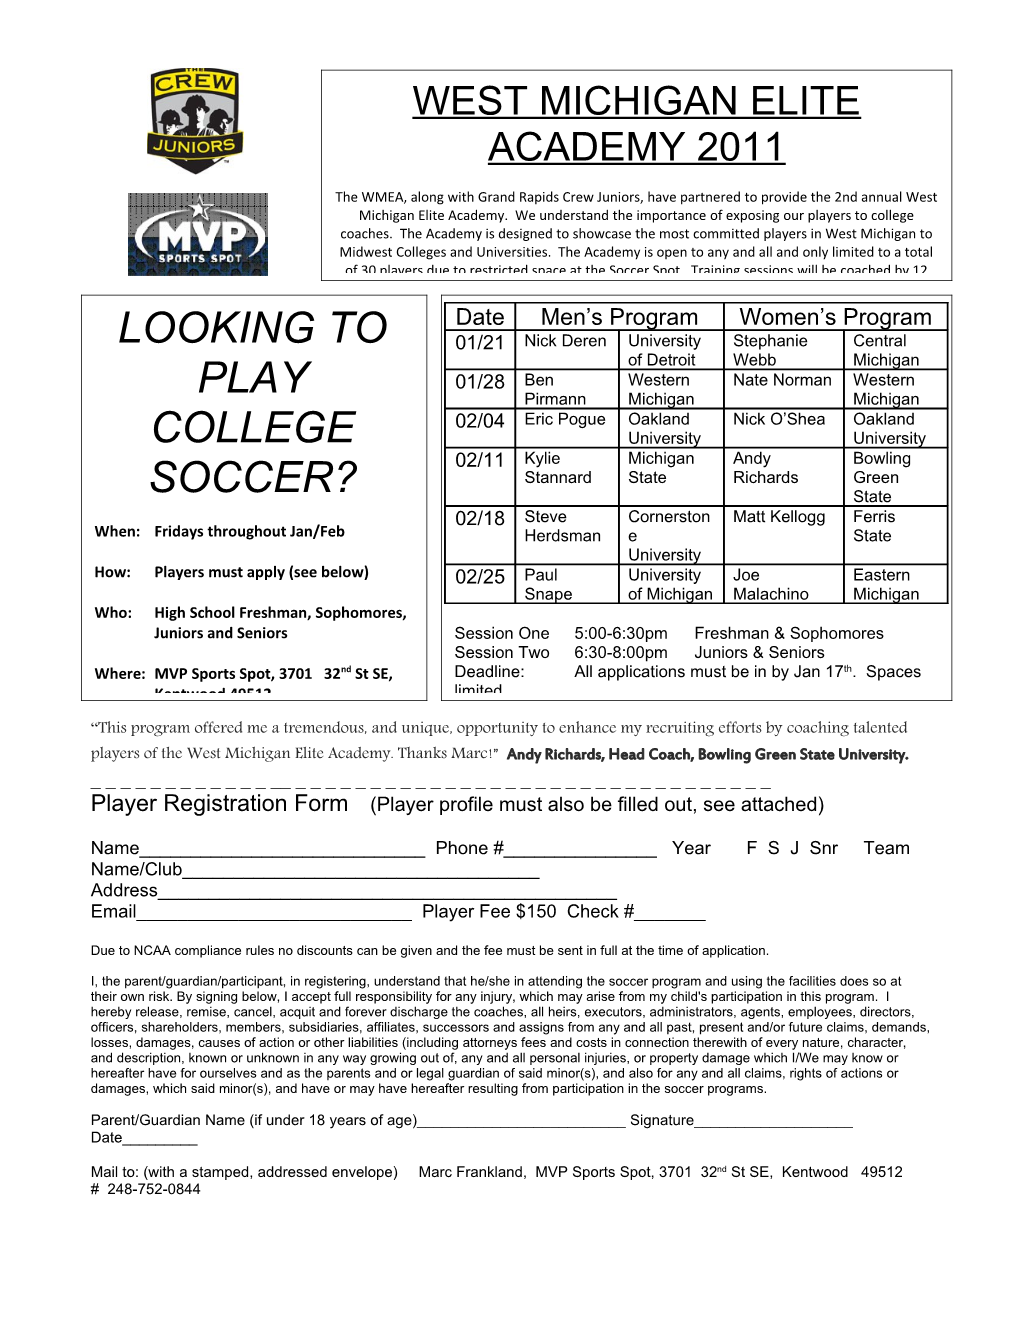 Player Registration Form (Player Profile Must Also Be Filled Out, See Attached)